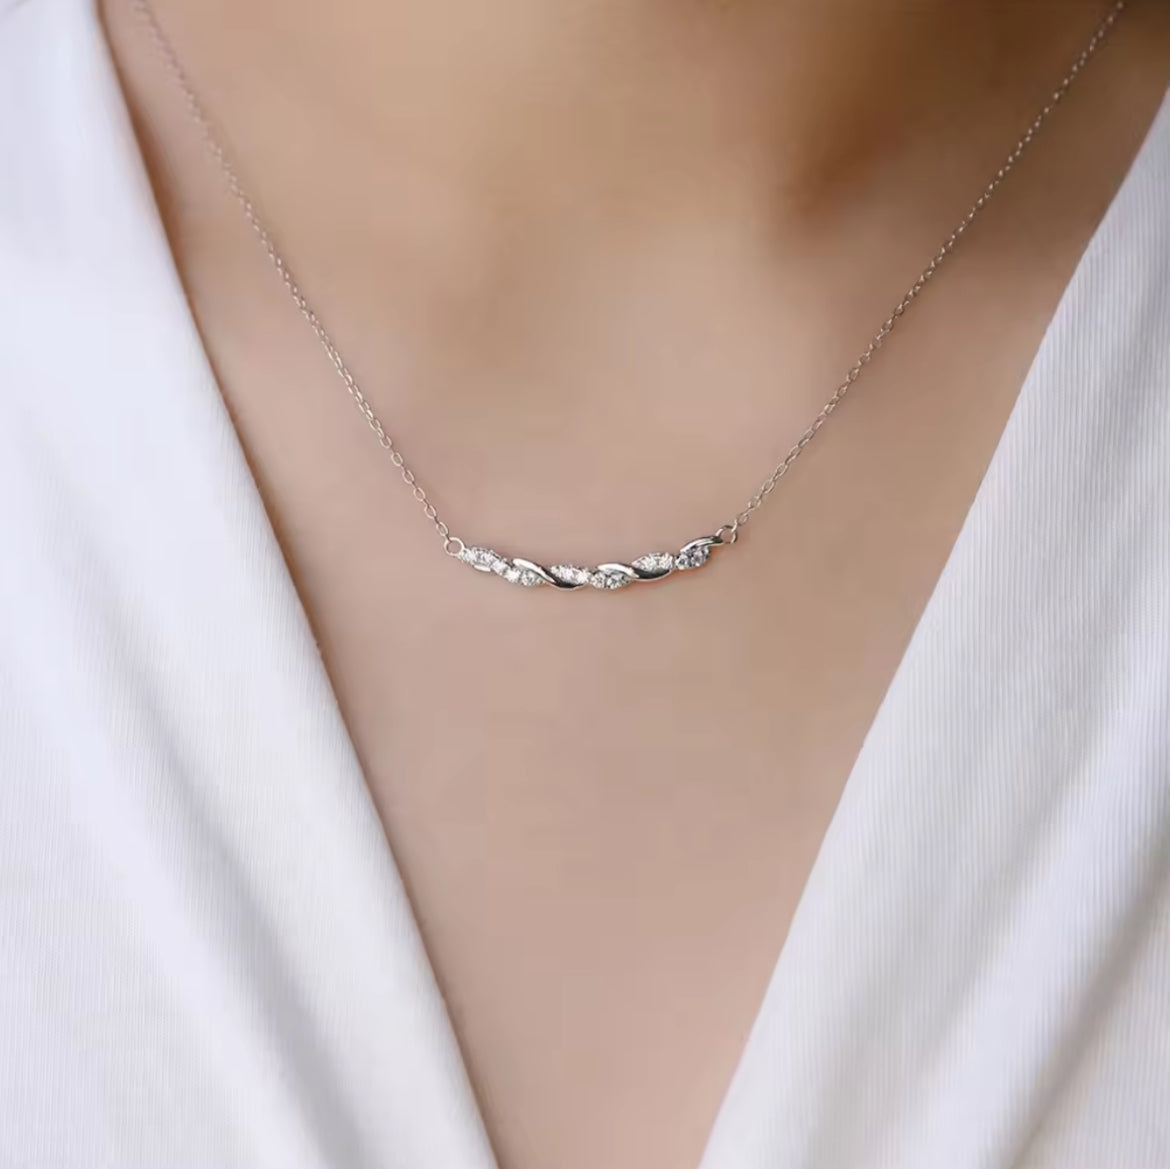 Simple and elegant necklace